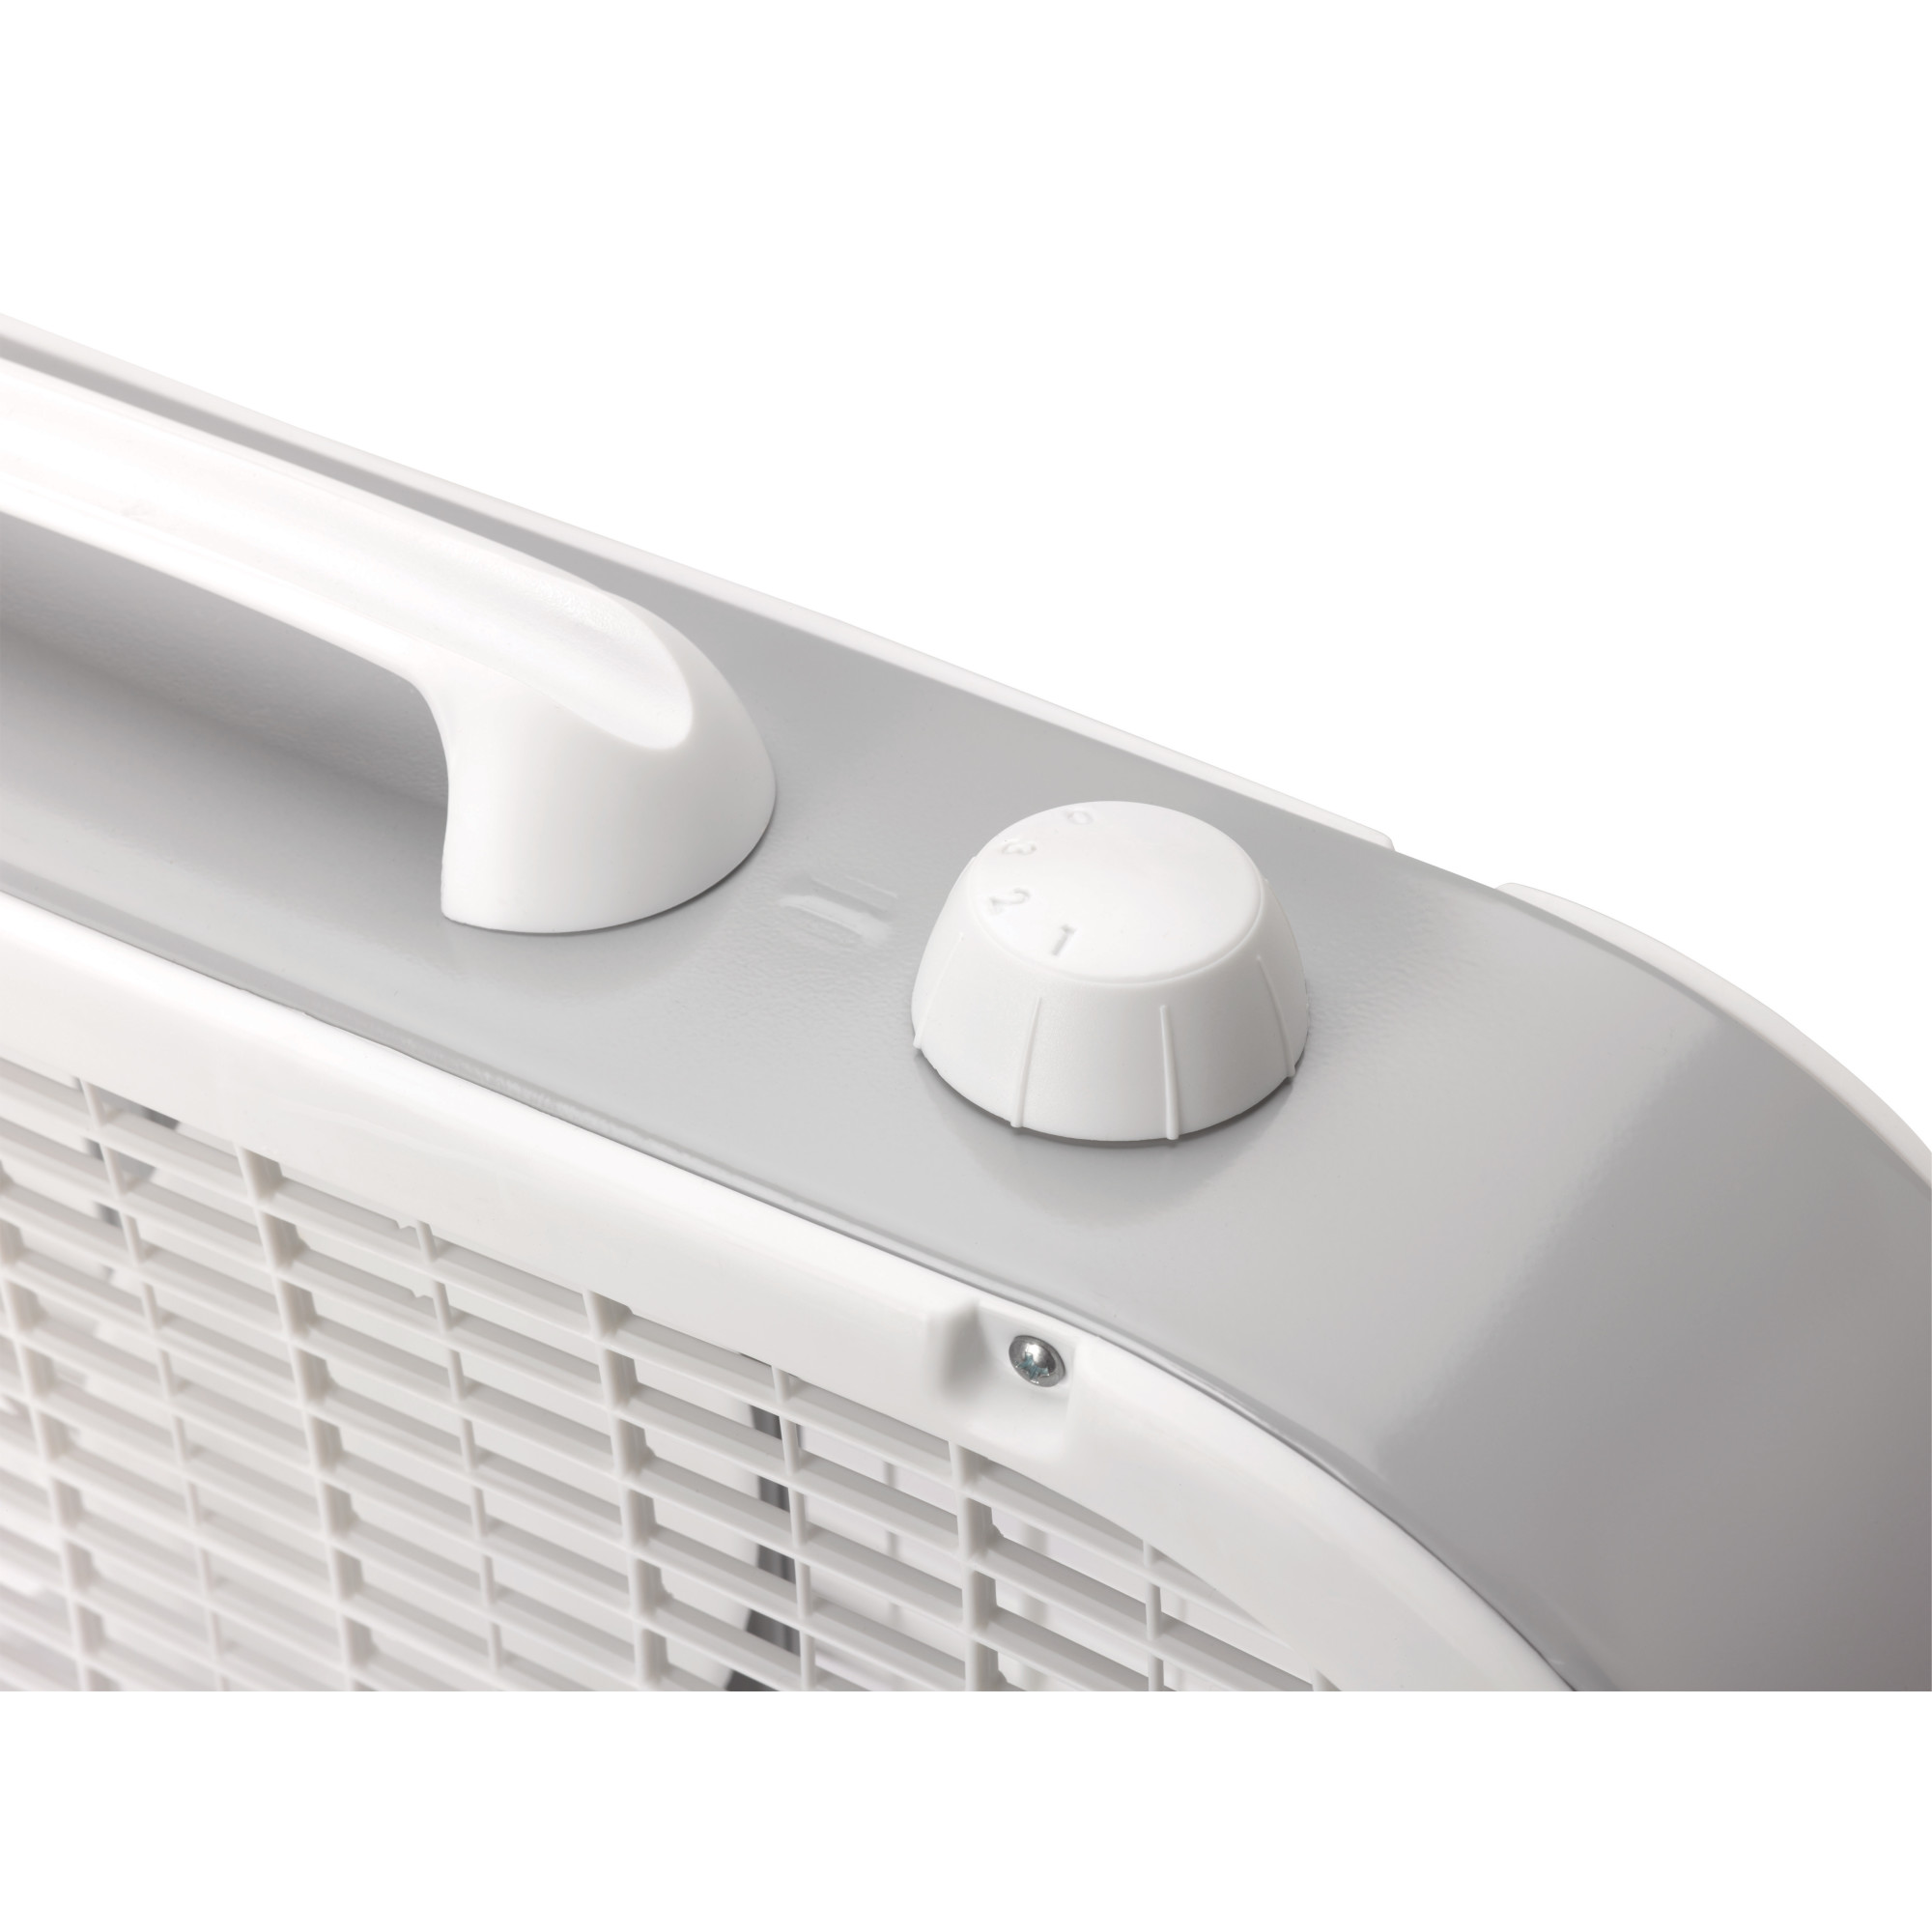 Lasko 20" Classic Box Fan with Weather-Resistant Motor, 3 Speeds, 22.5" H, White, B20200, New - image 3 of 7